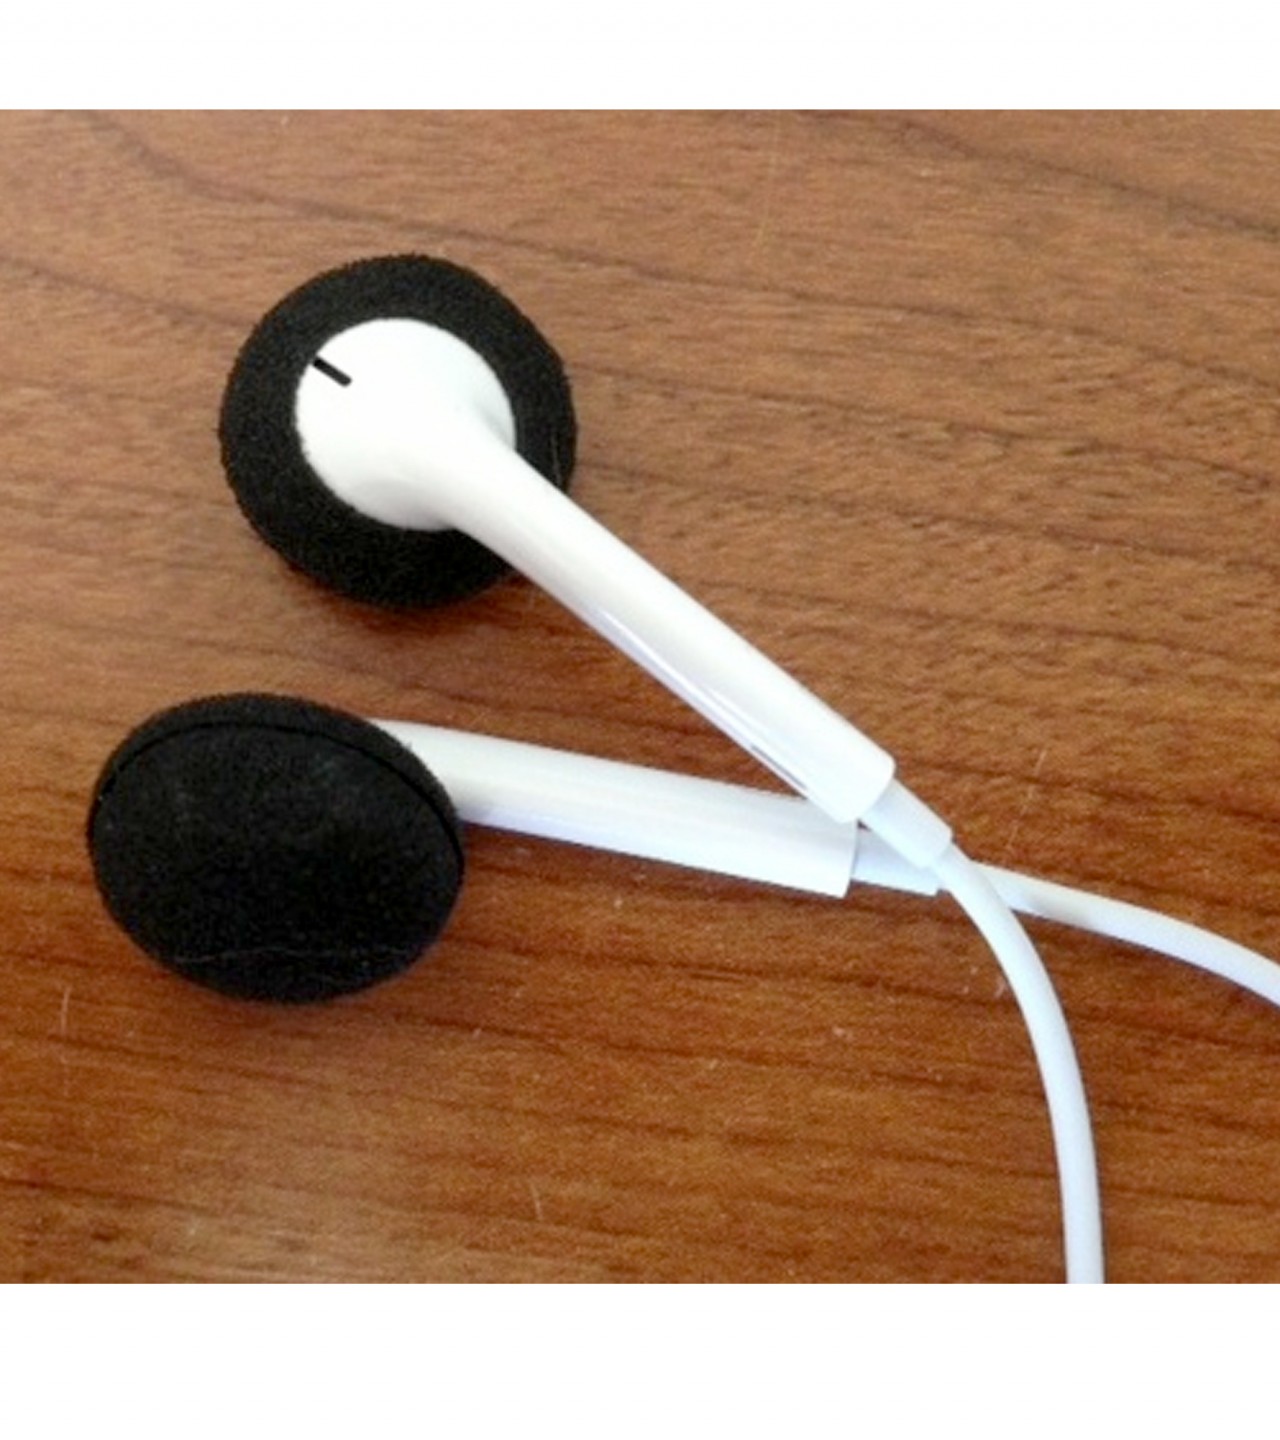 iPhone/Gionee/IPod Handsfree Ear Bud Caps - 3 Different Colours - Pack of 4